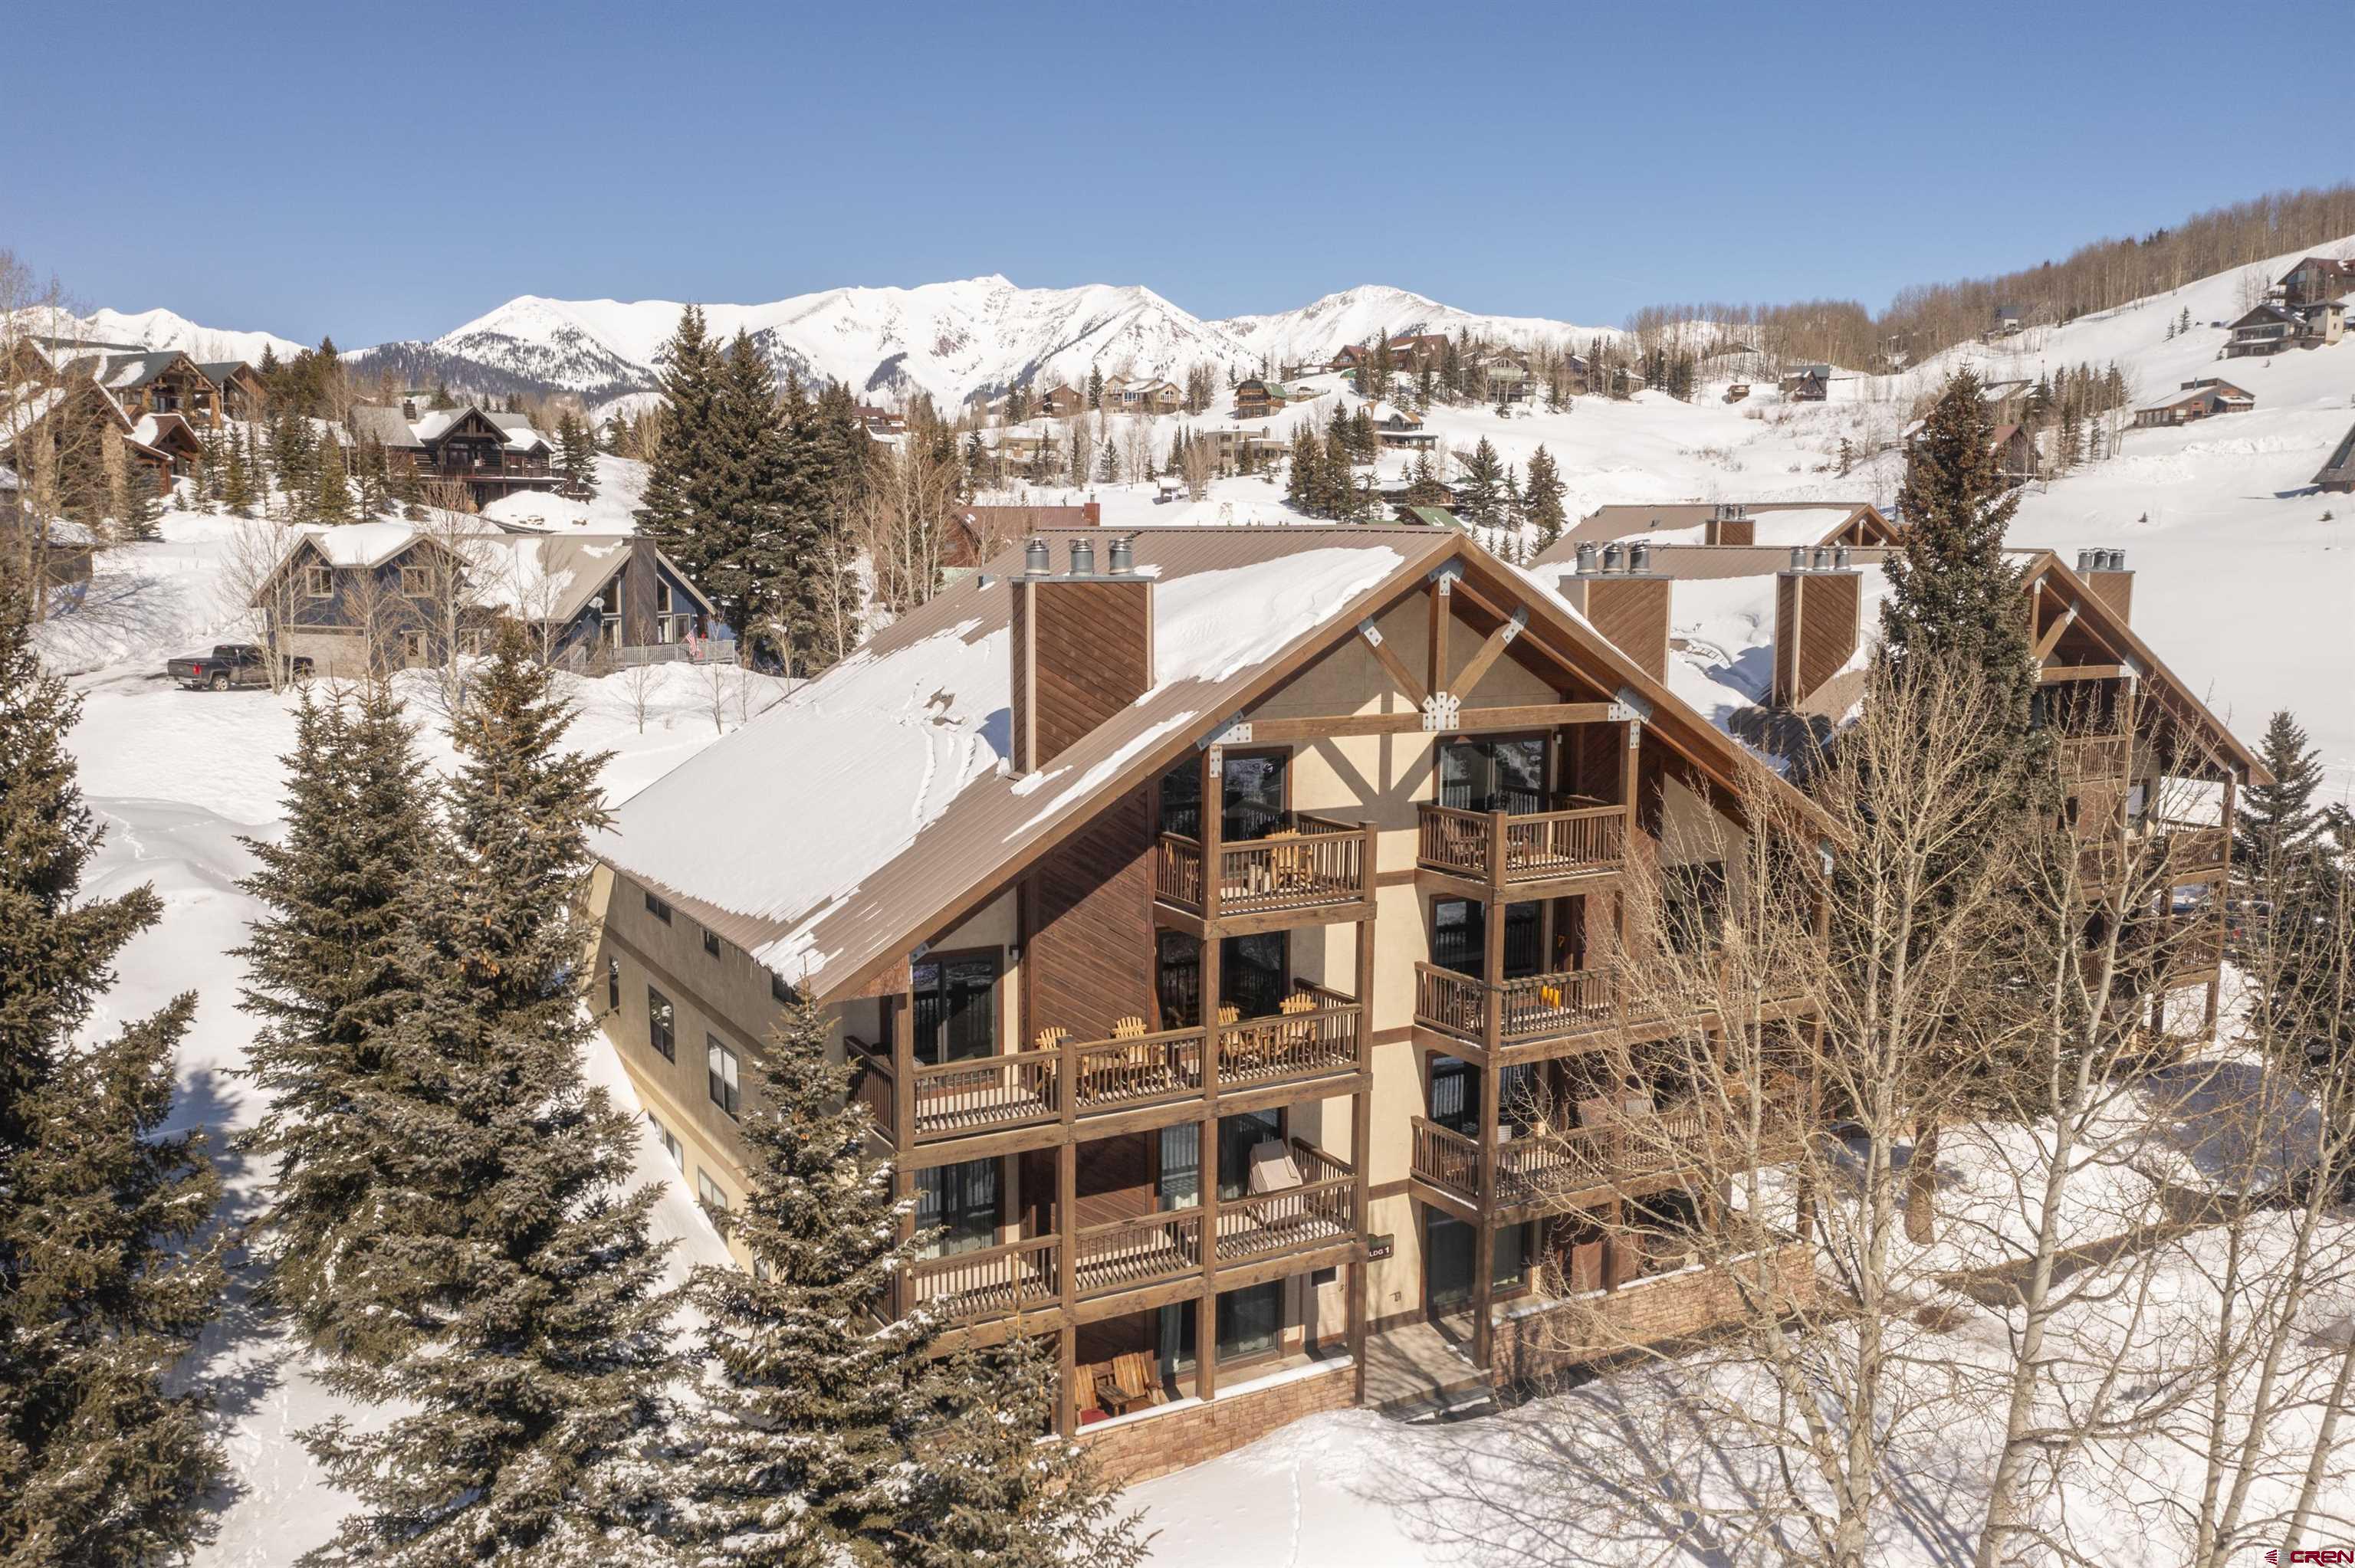 17 Treasury Road, #1D, Mt. Crested Butte, CO 81225 Listing Photo  1